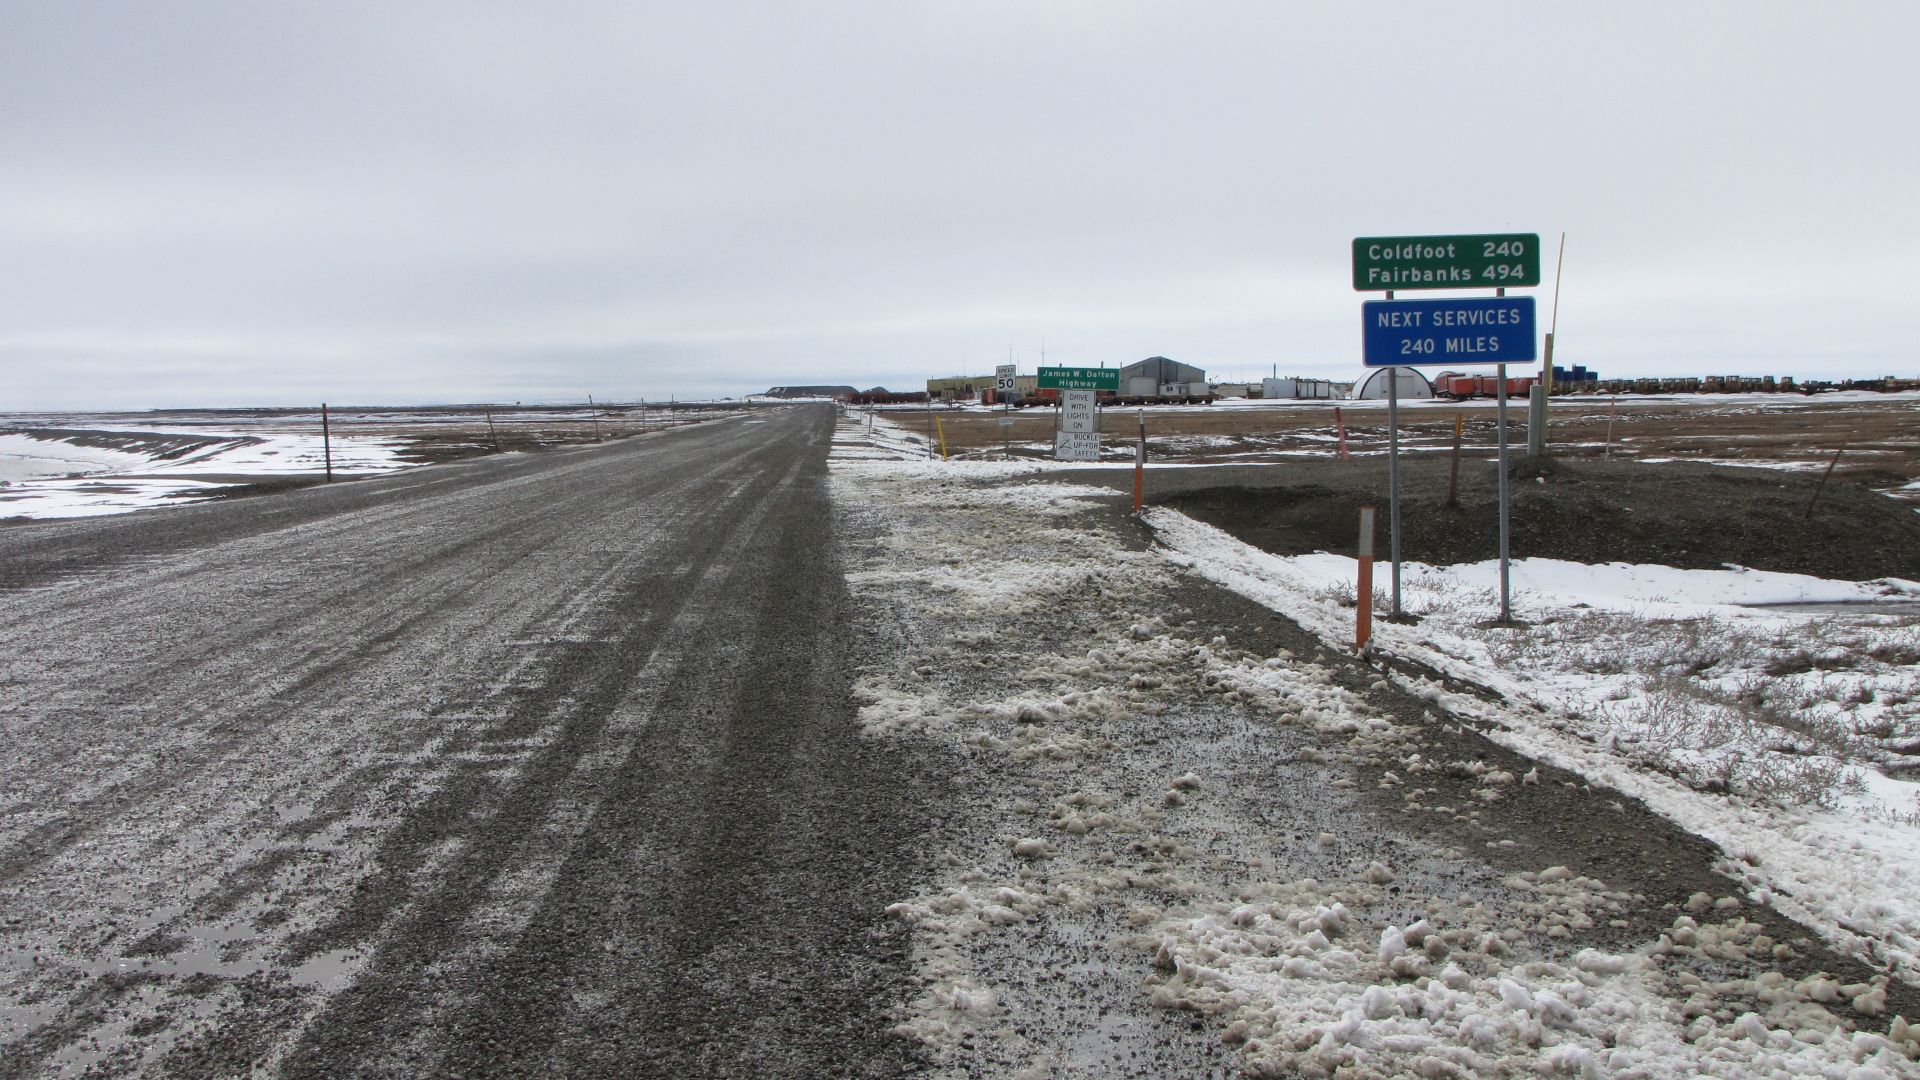 Dalton Highway mile zero - now or never (Well its a bit late to turn back now!)